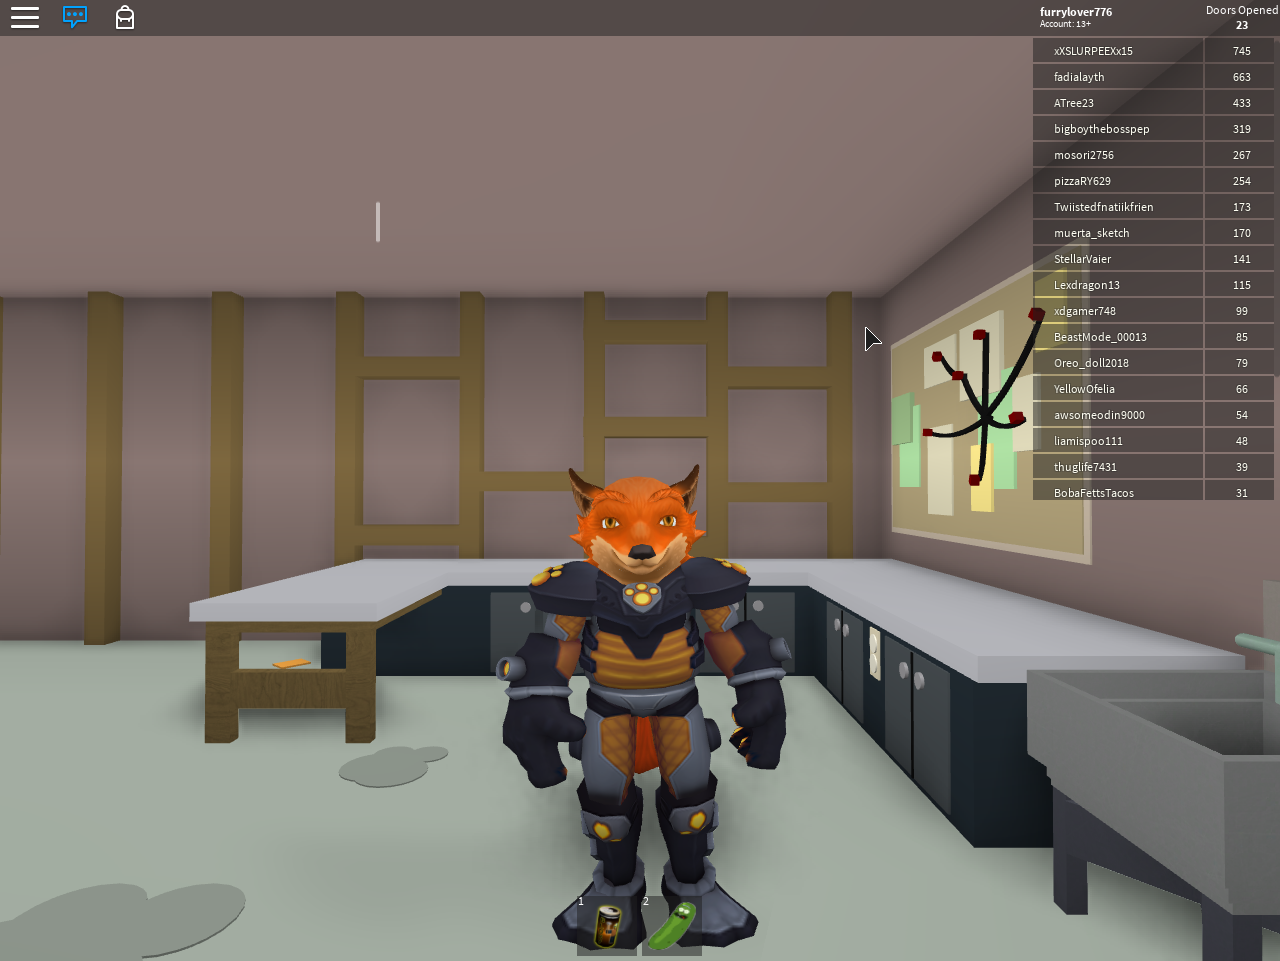 Furry In A Roblox Game By Furryfoxwolfxd Fur Affinity Dot Net - furries on roblox